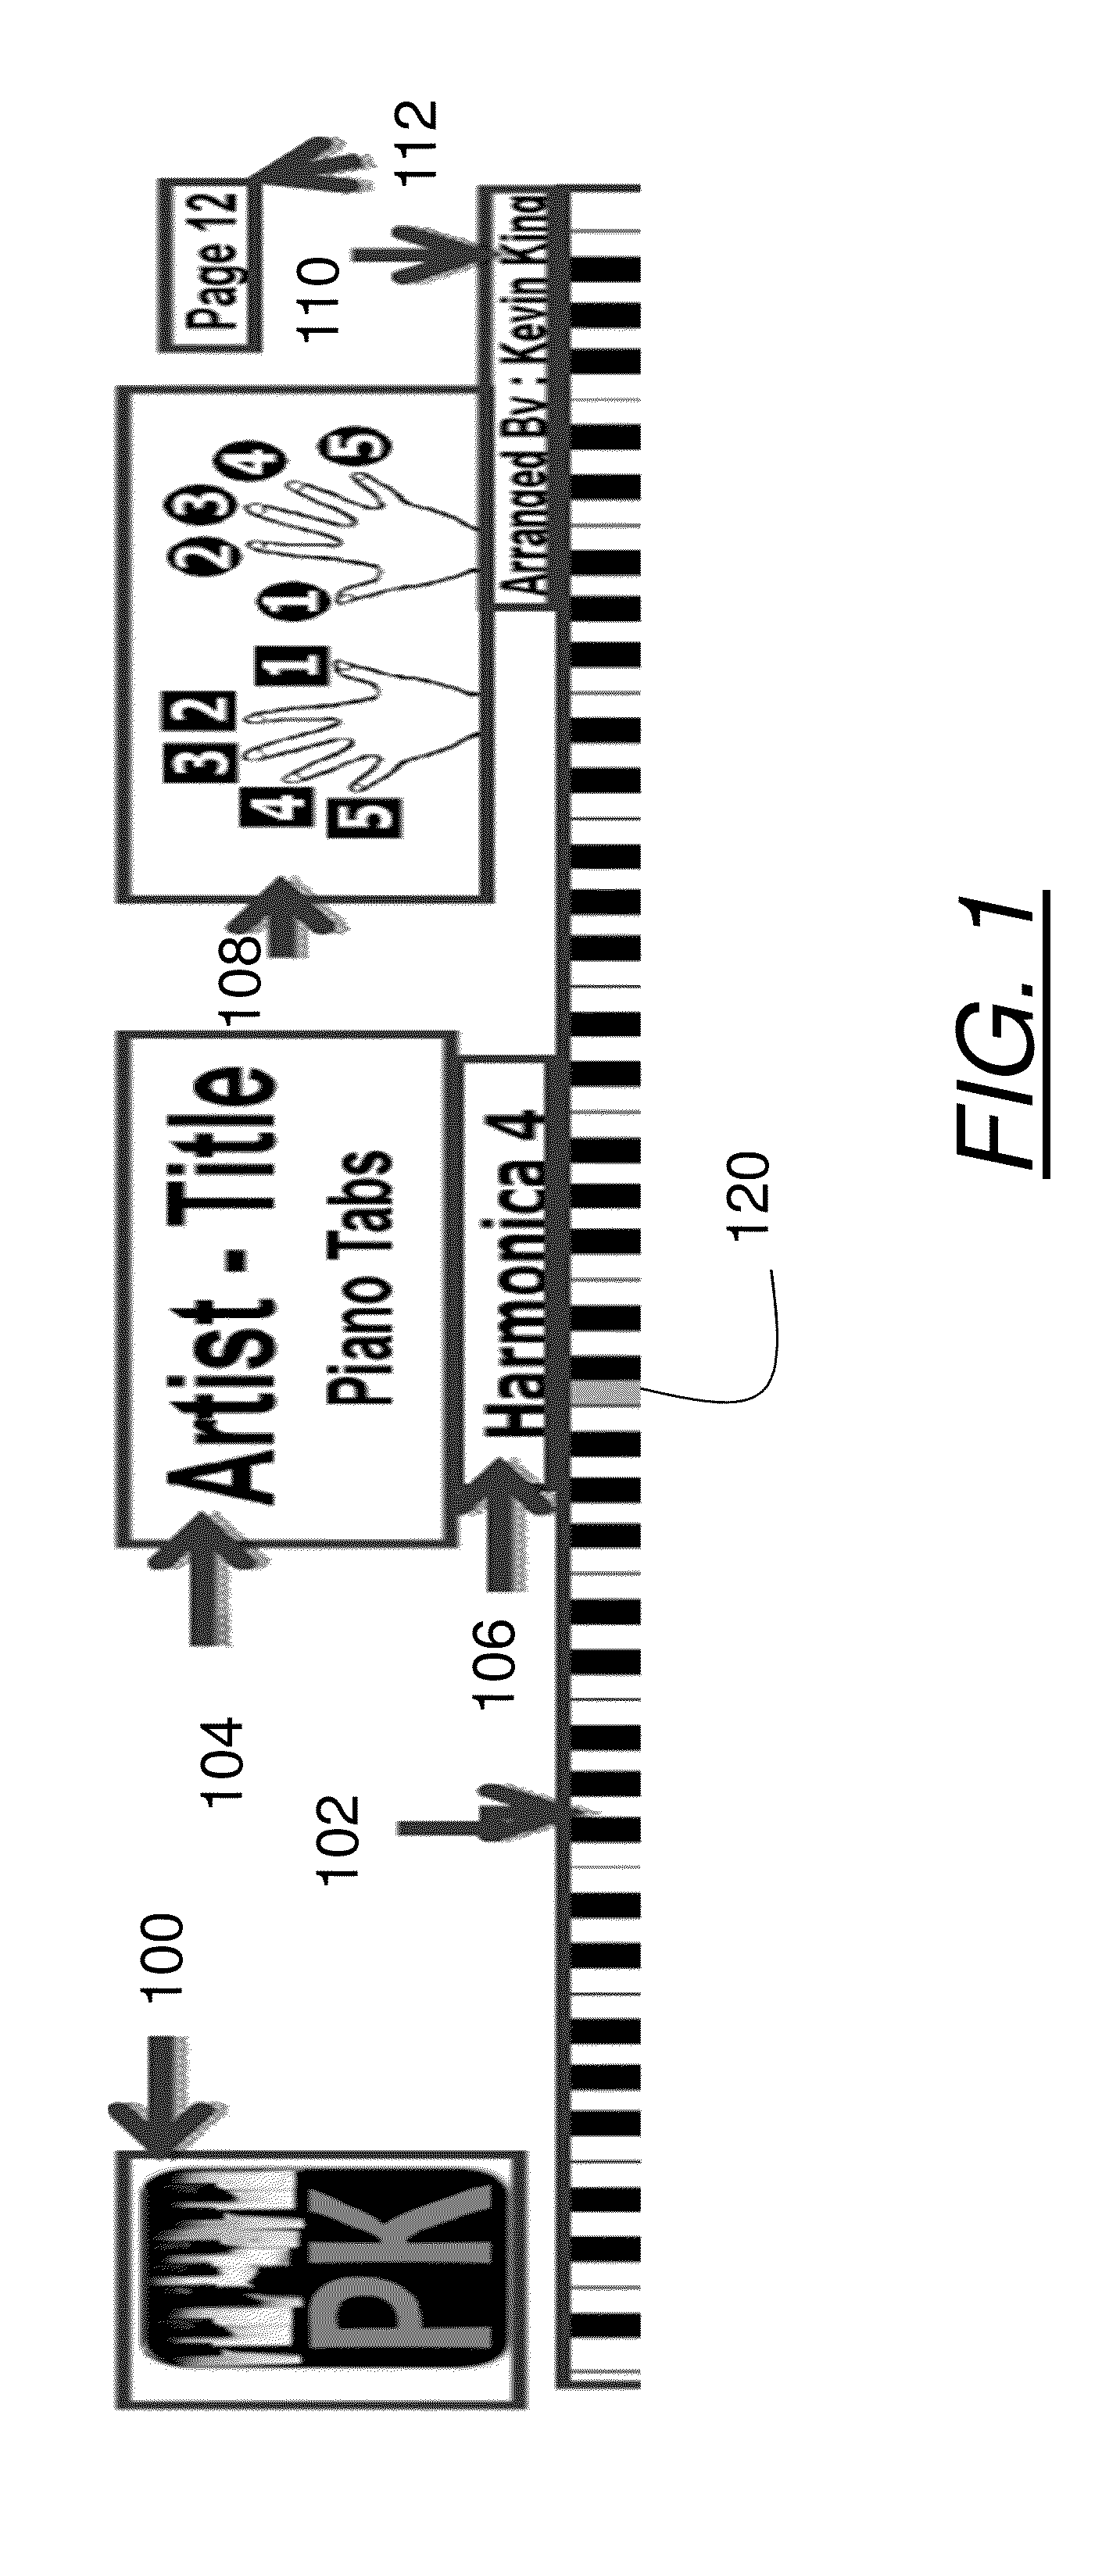 Piano tablature system and method